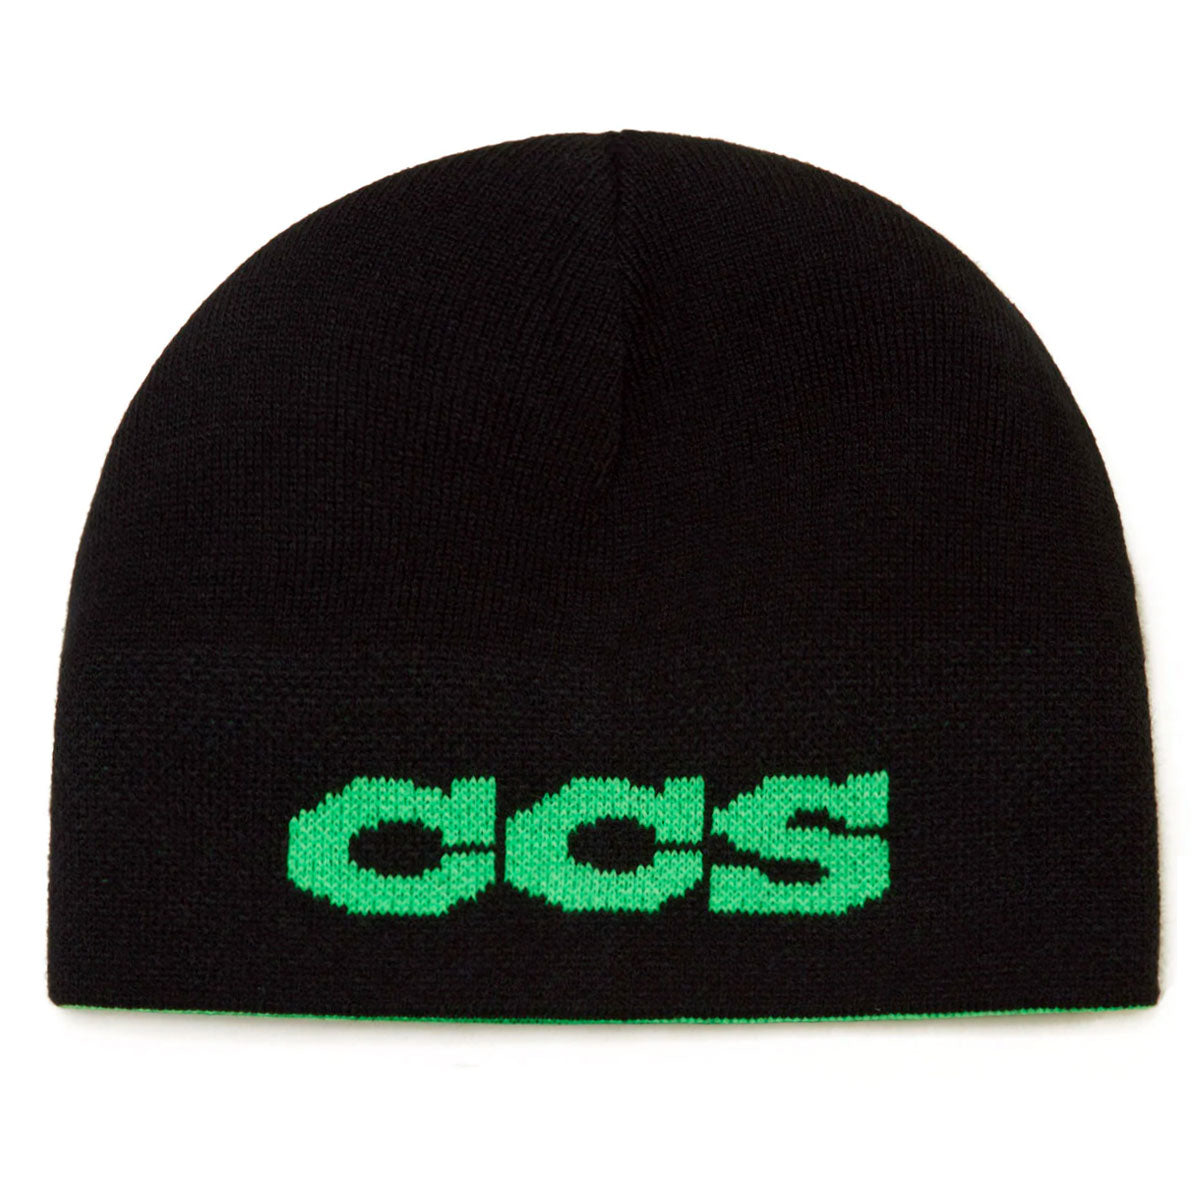 CCS Flames Reversible Skully Beanie - Black/Green image 3